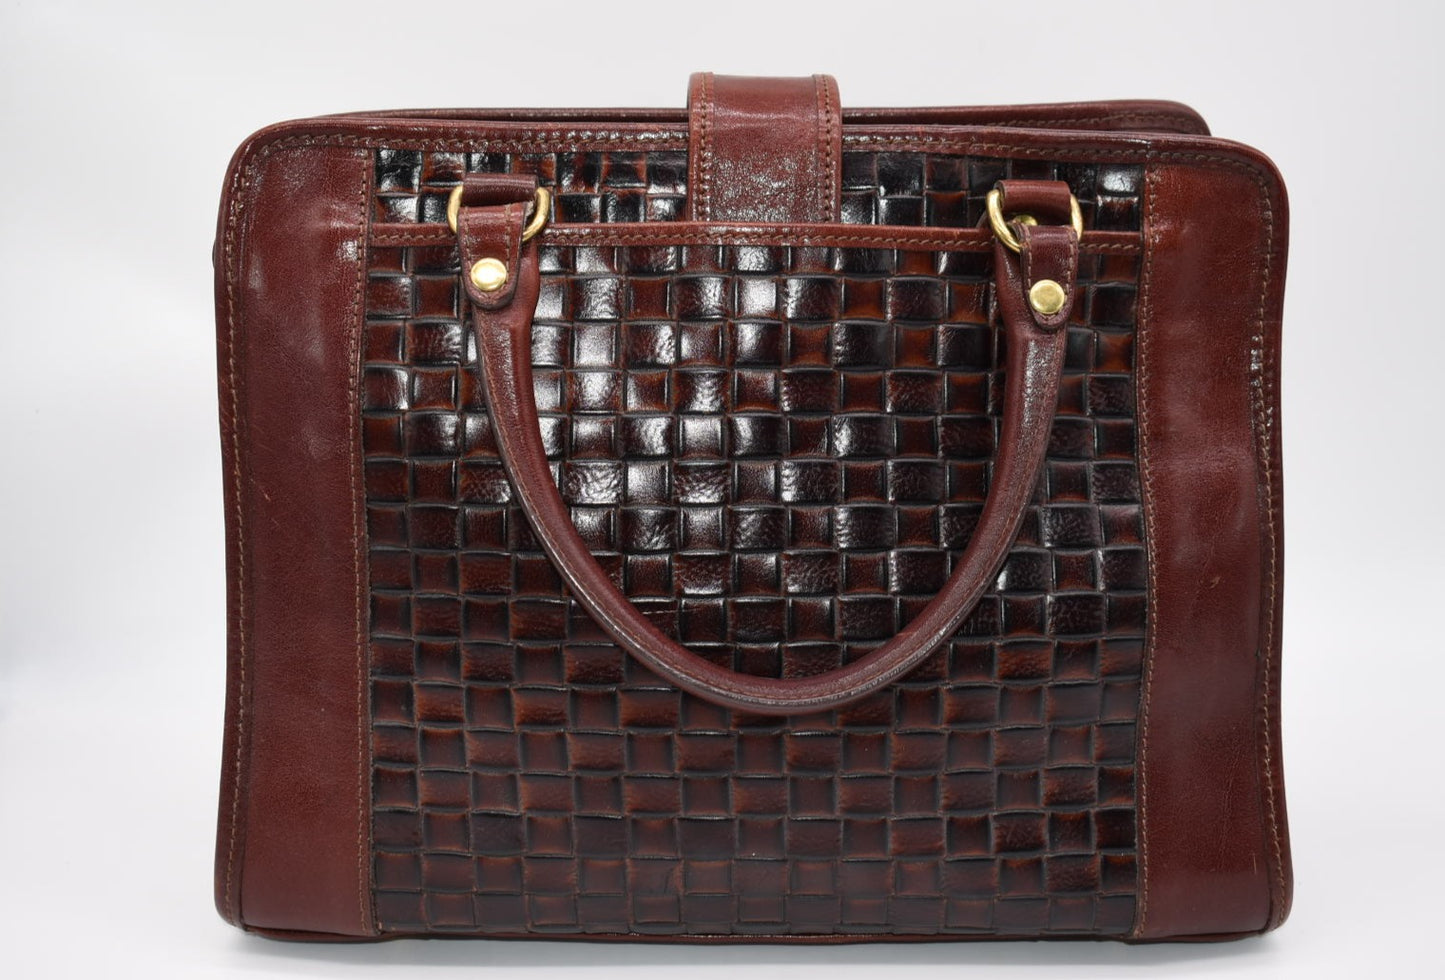 Brahmin Addison Satchel Bag in Woven Brown Leather